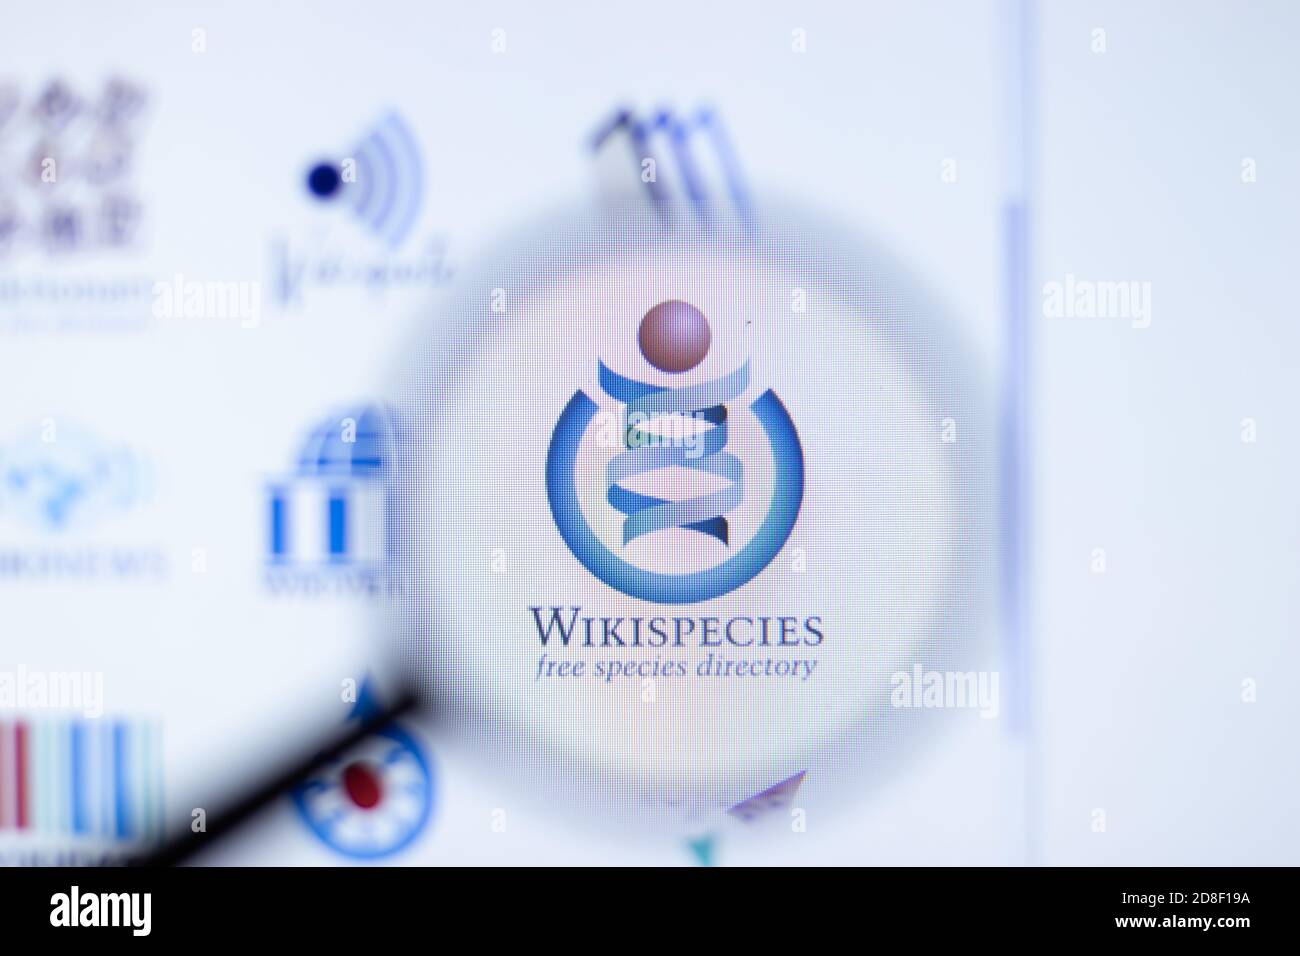 New York, USA - 29 September 2020: Wikispecies company website with logo close up, Illustrative Editorial Stock Photo